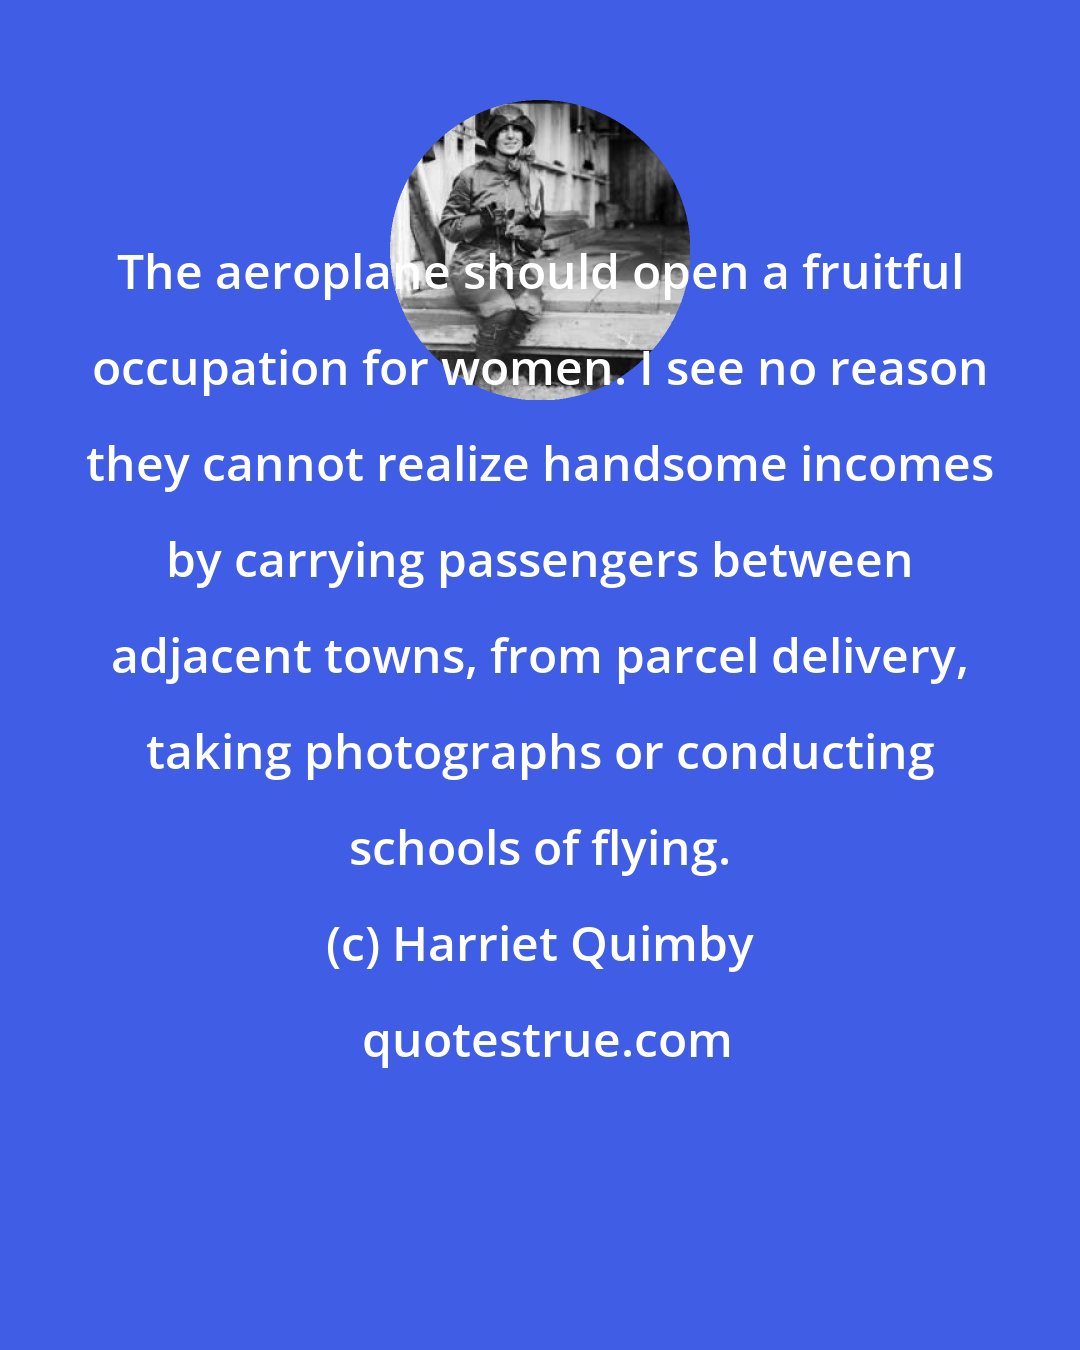 Harriet Quimby: The aeroplane should open a fruitful occupation for women. I see no reason they cannot realize handsome incomes by carrying passengers between adjacent towns, from parcel delivery, taking photographs or conducting schools of flying.